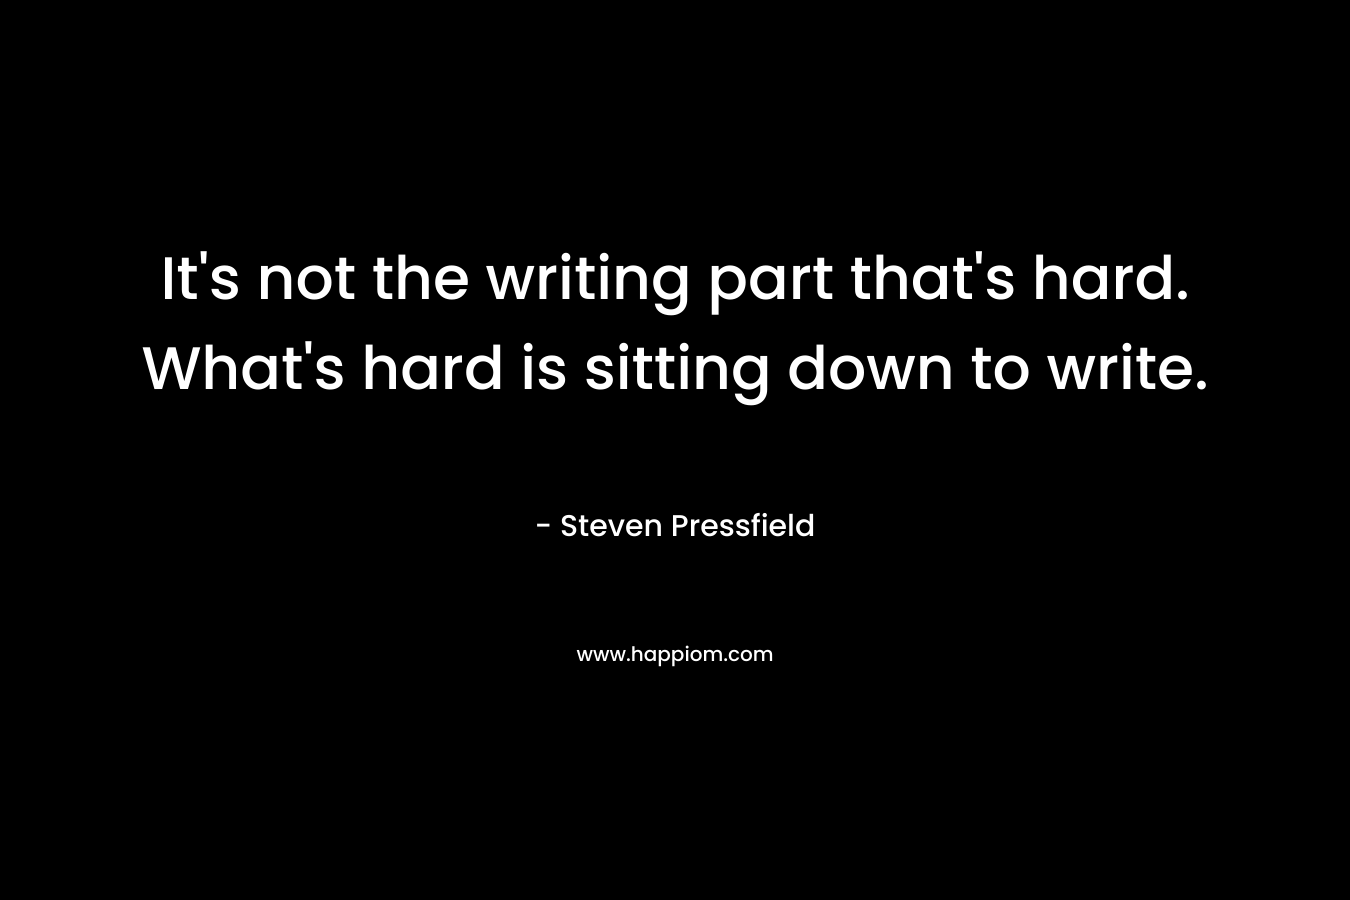 It's not the writing part that's hard. What's hard is sitting down to write.